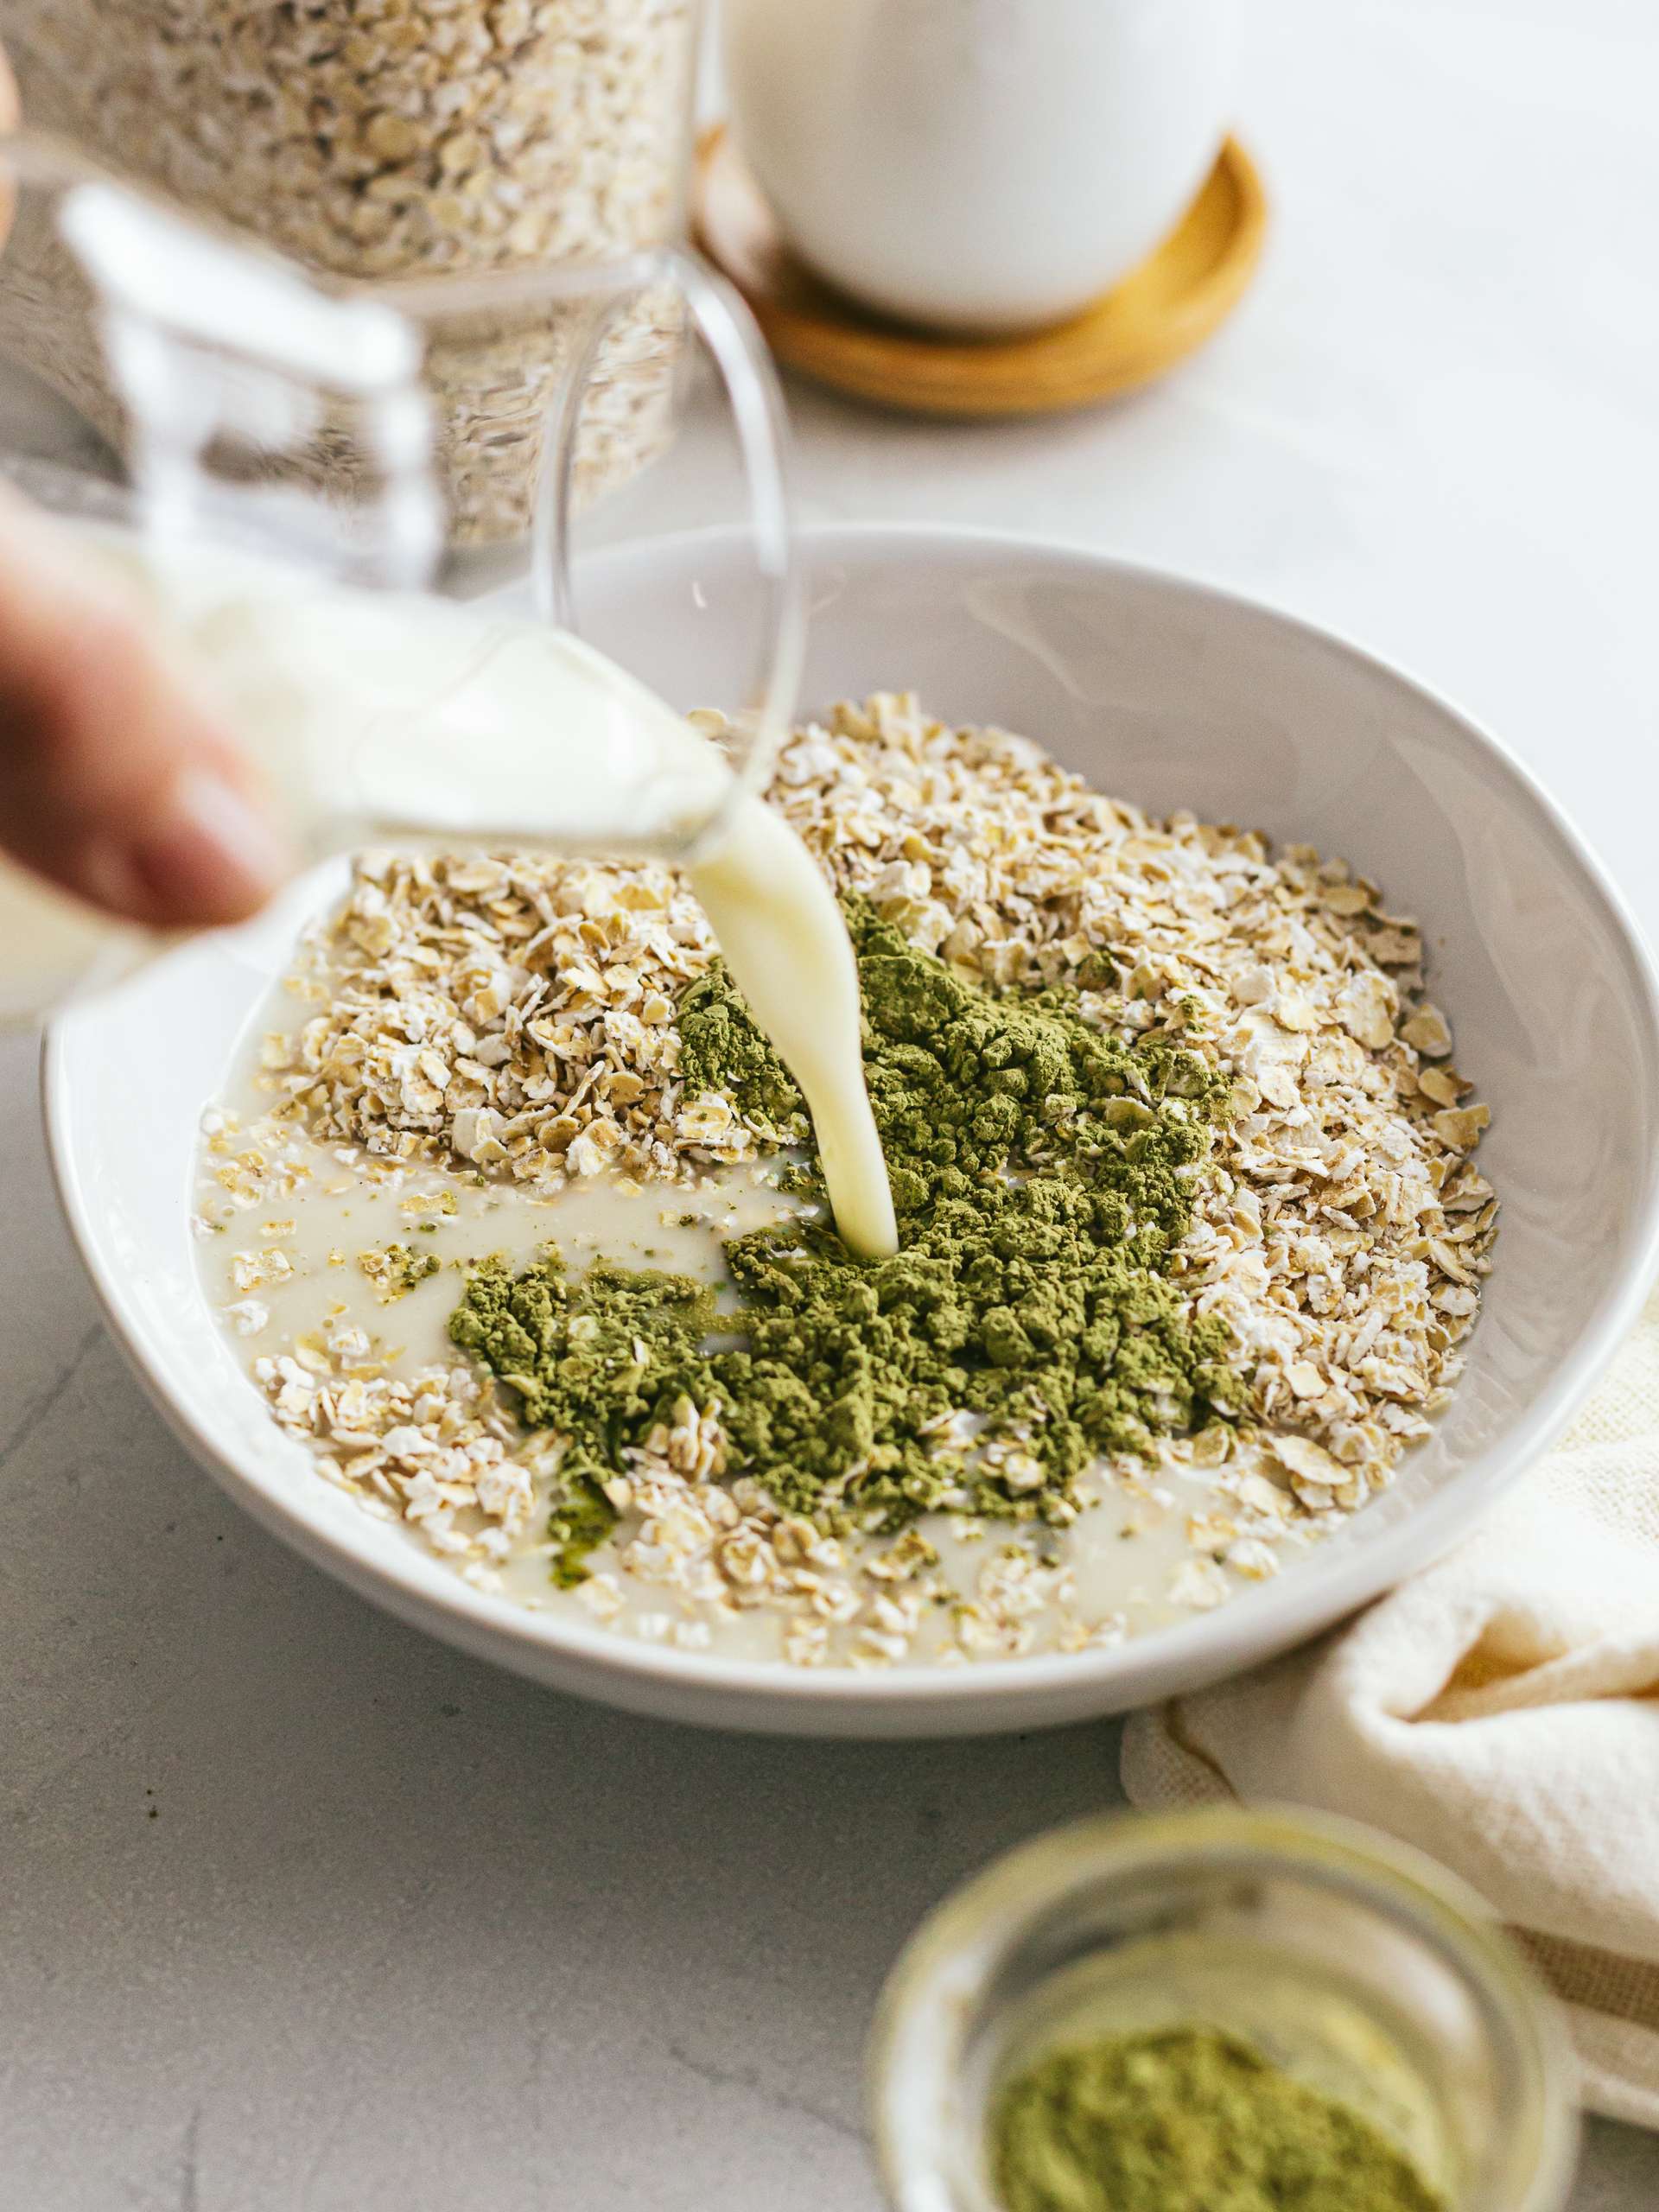 pouring milk into a bowl with oats and matcha powder